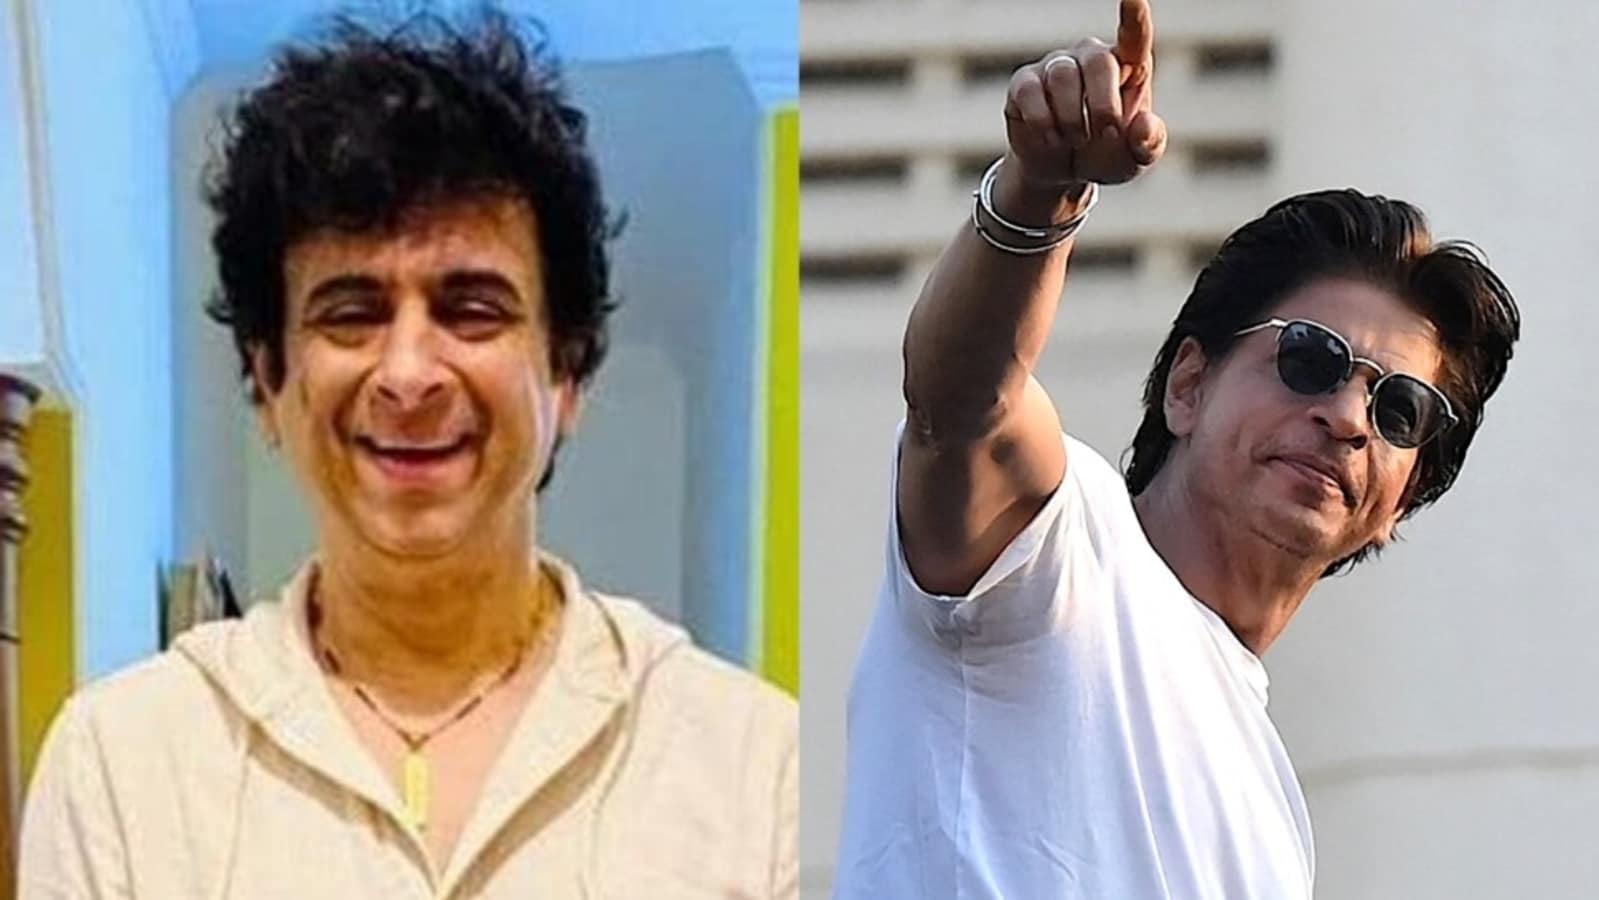 Palash Sen says his success was different from school mate Shah Rukh Khan: ‘He took escalator and I the stairs’